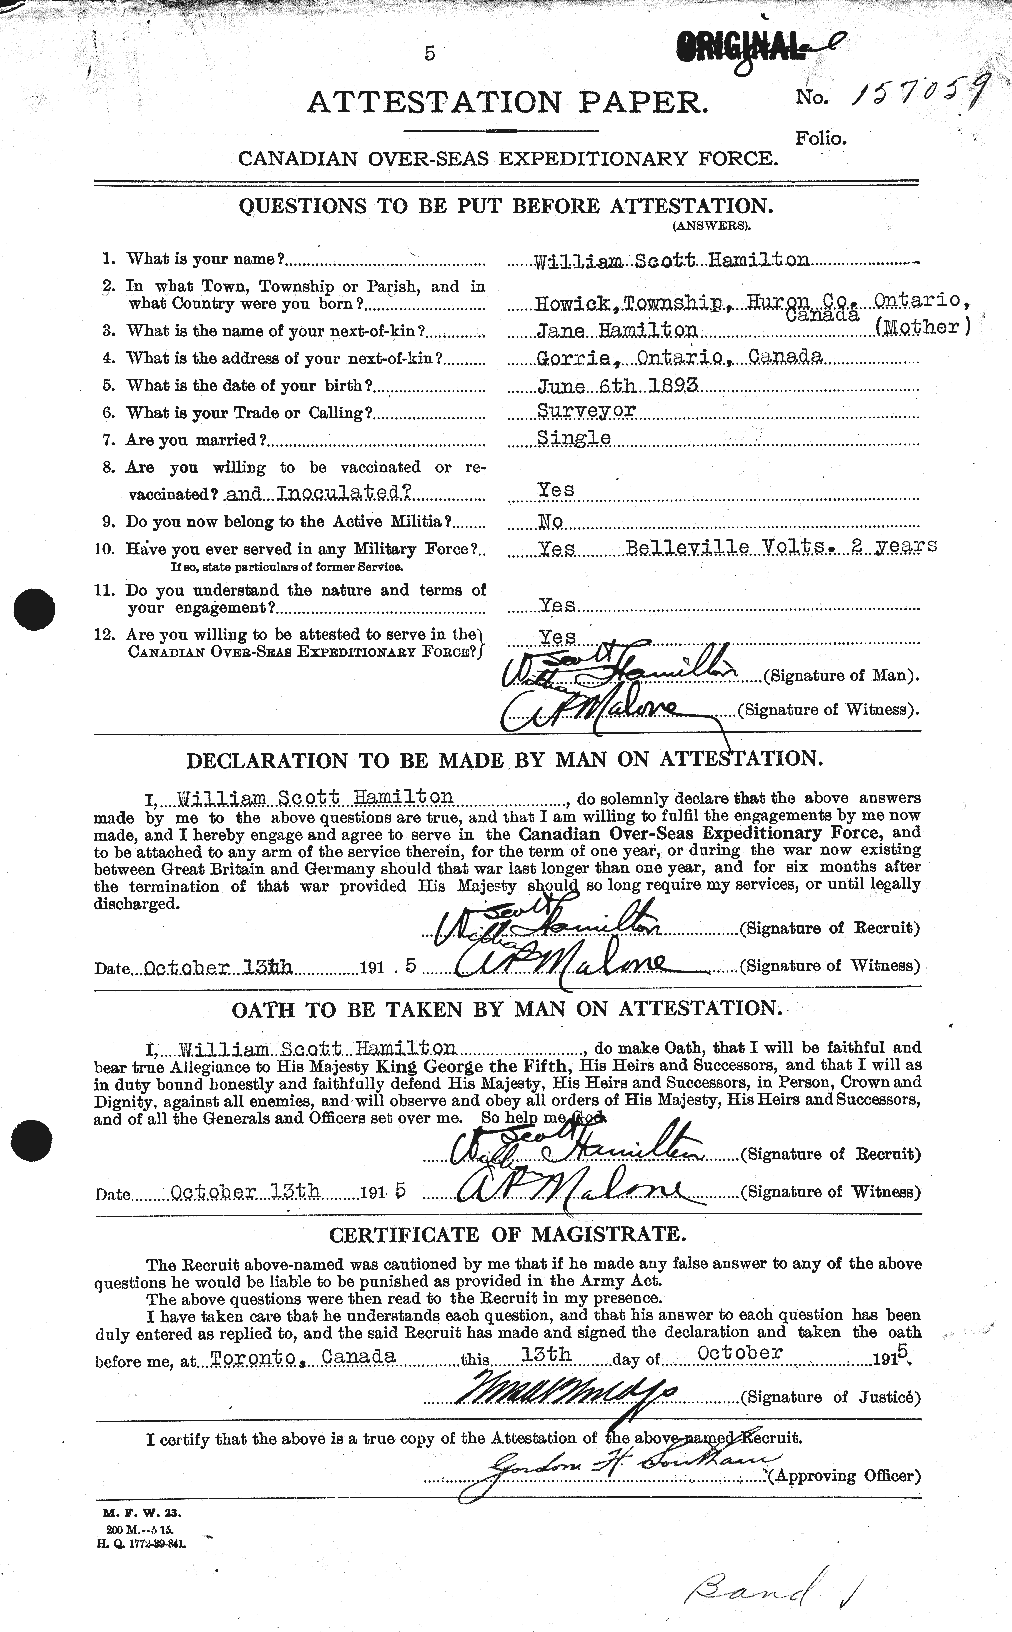 Personnel Records of the First World War - CEF 374927a